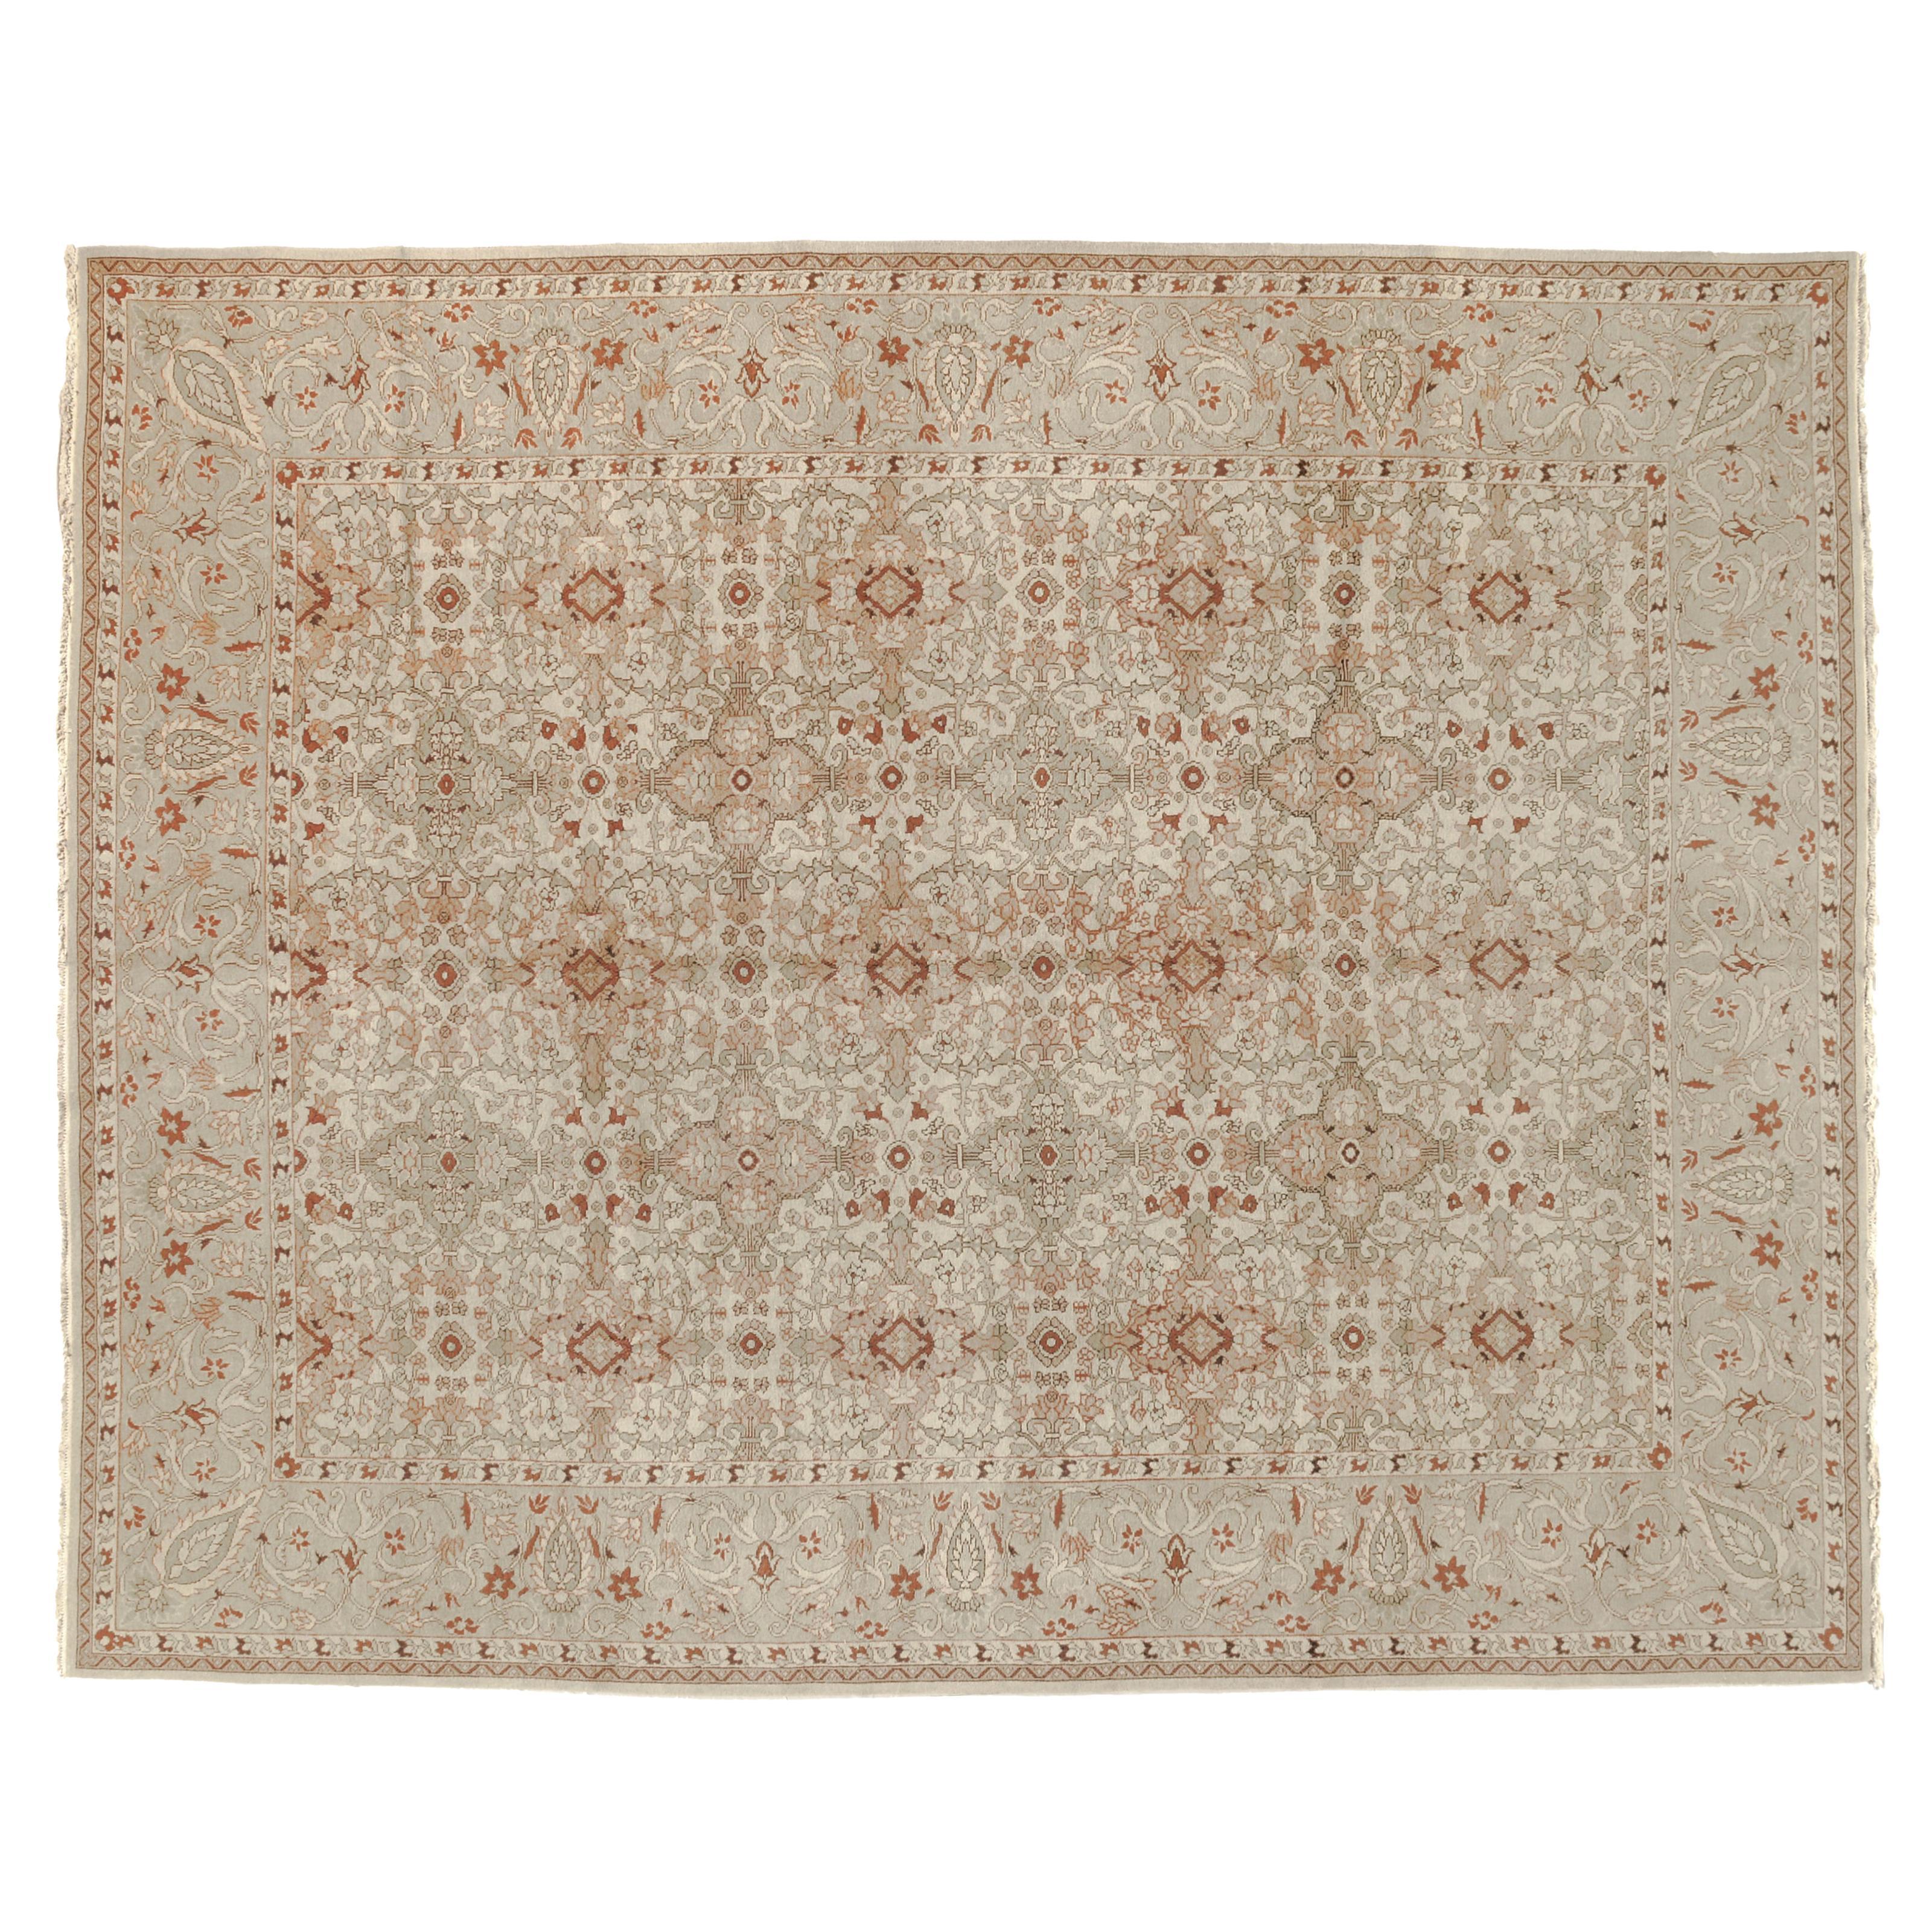 9'x12' French Floral Inspired Hand-Knotted Wool Rug For Sale